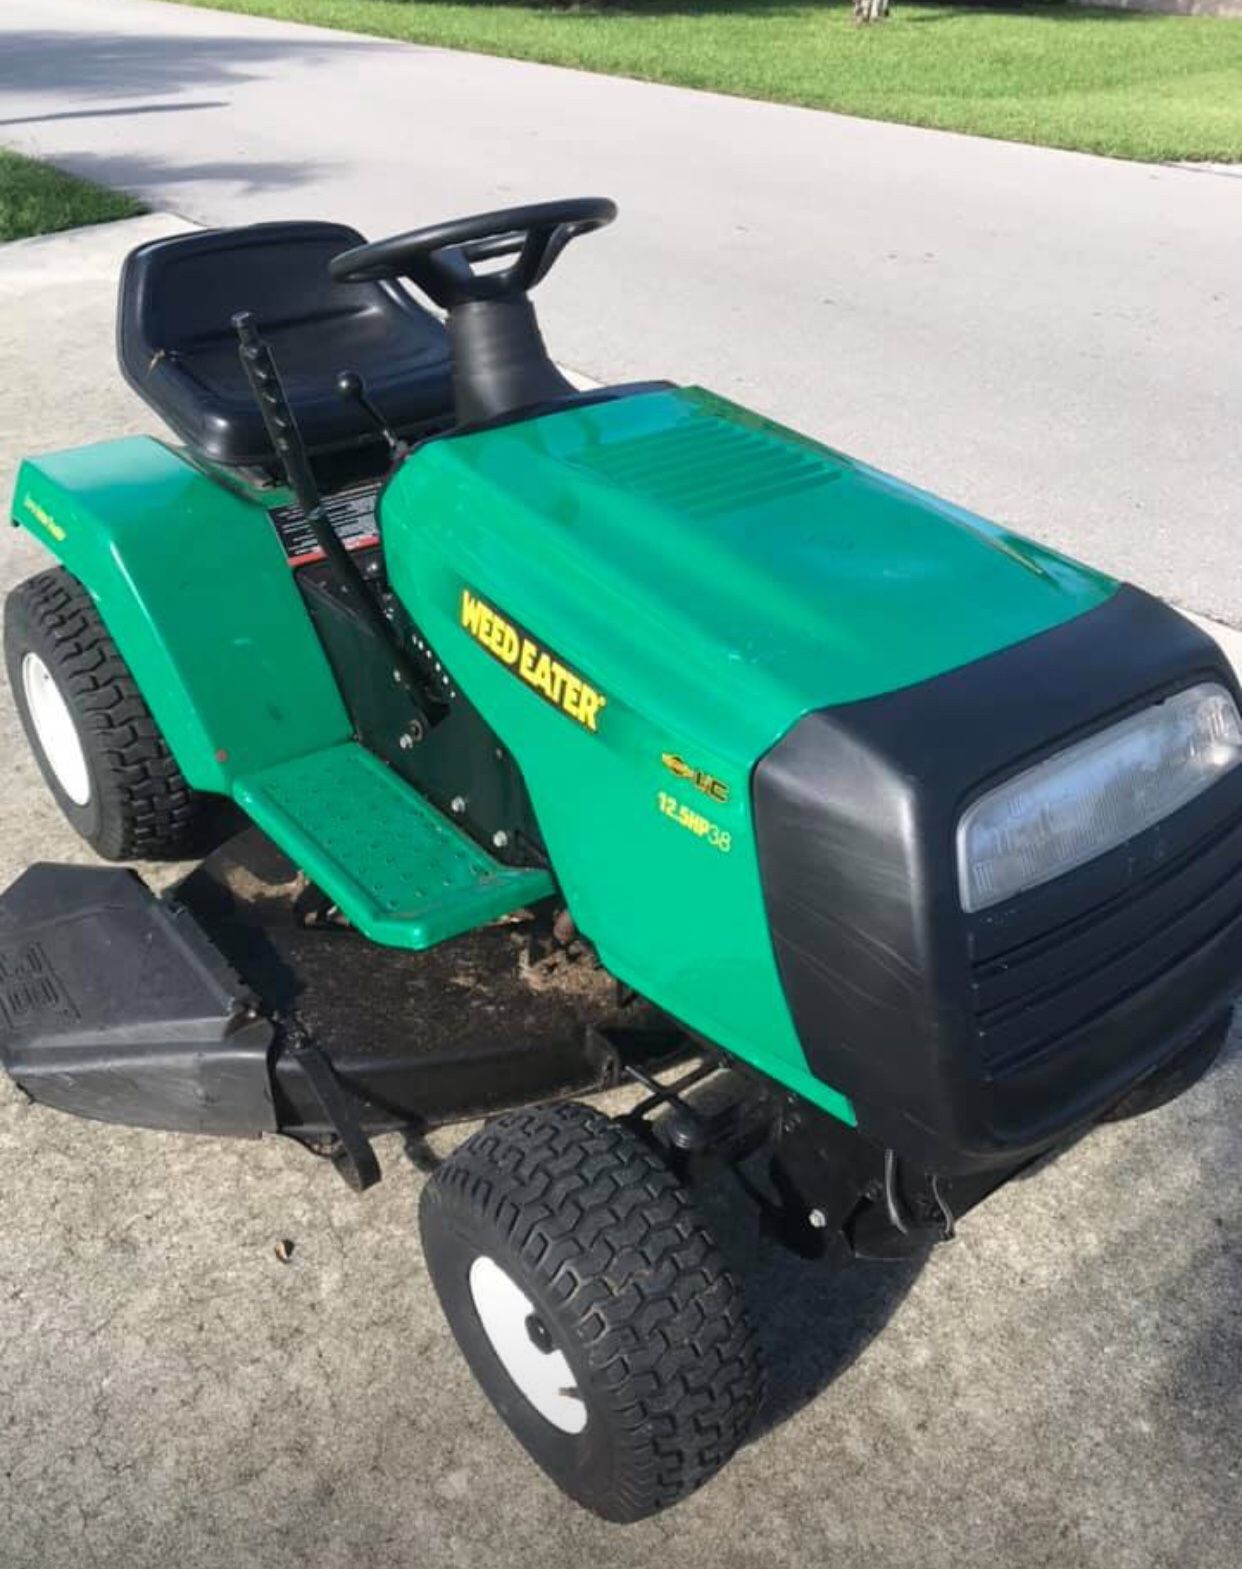 Weed eater Riding lawn mower